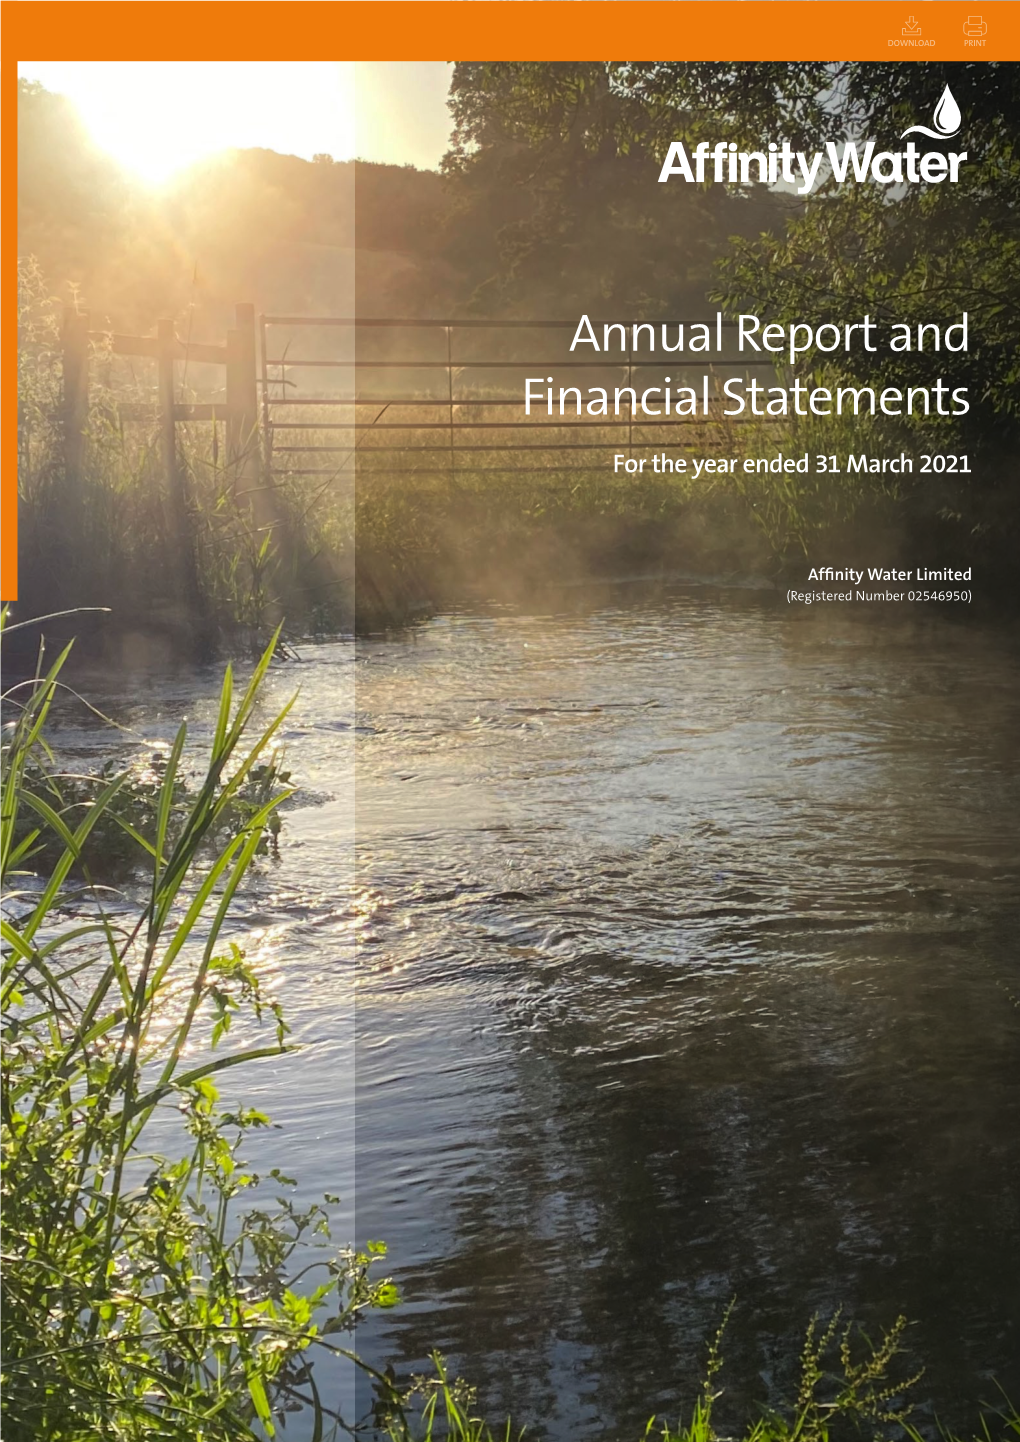 Annual Report and Financial Statements for the Year Ended 31 March 2021